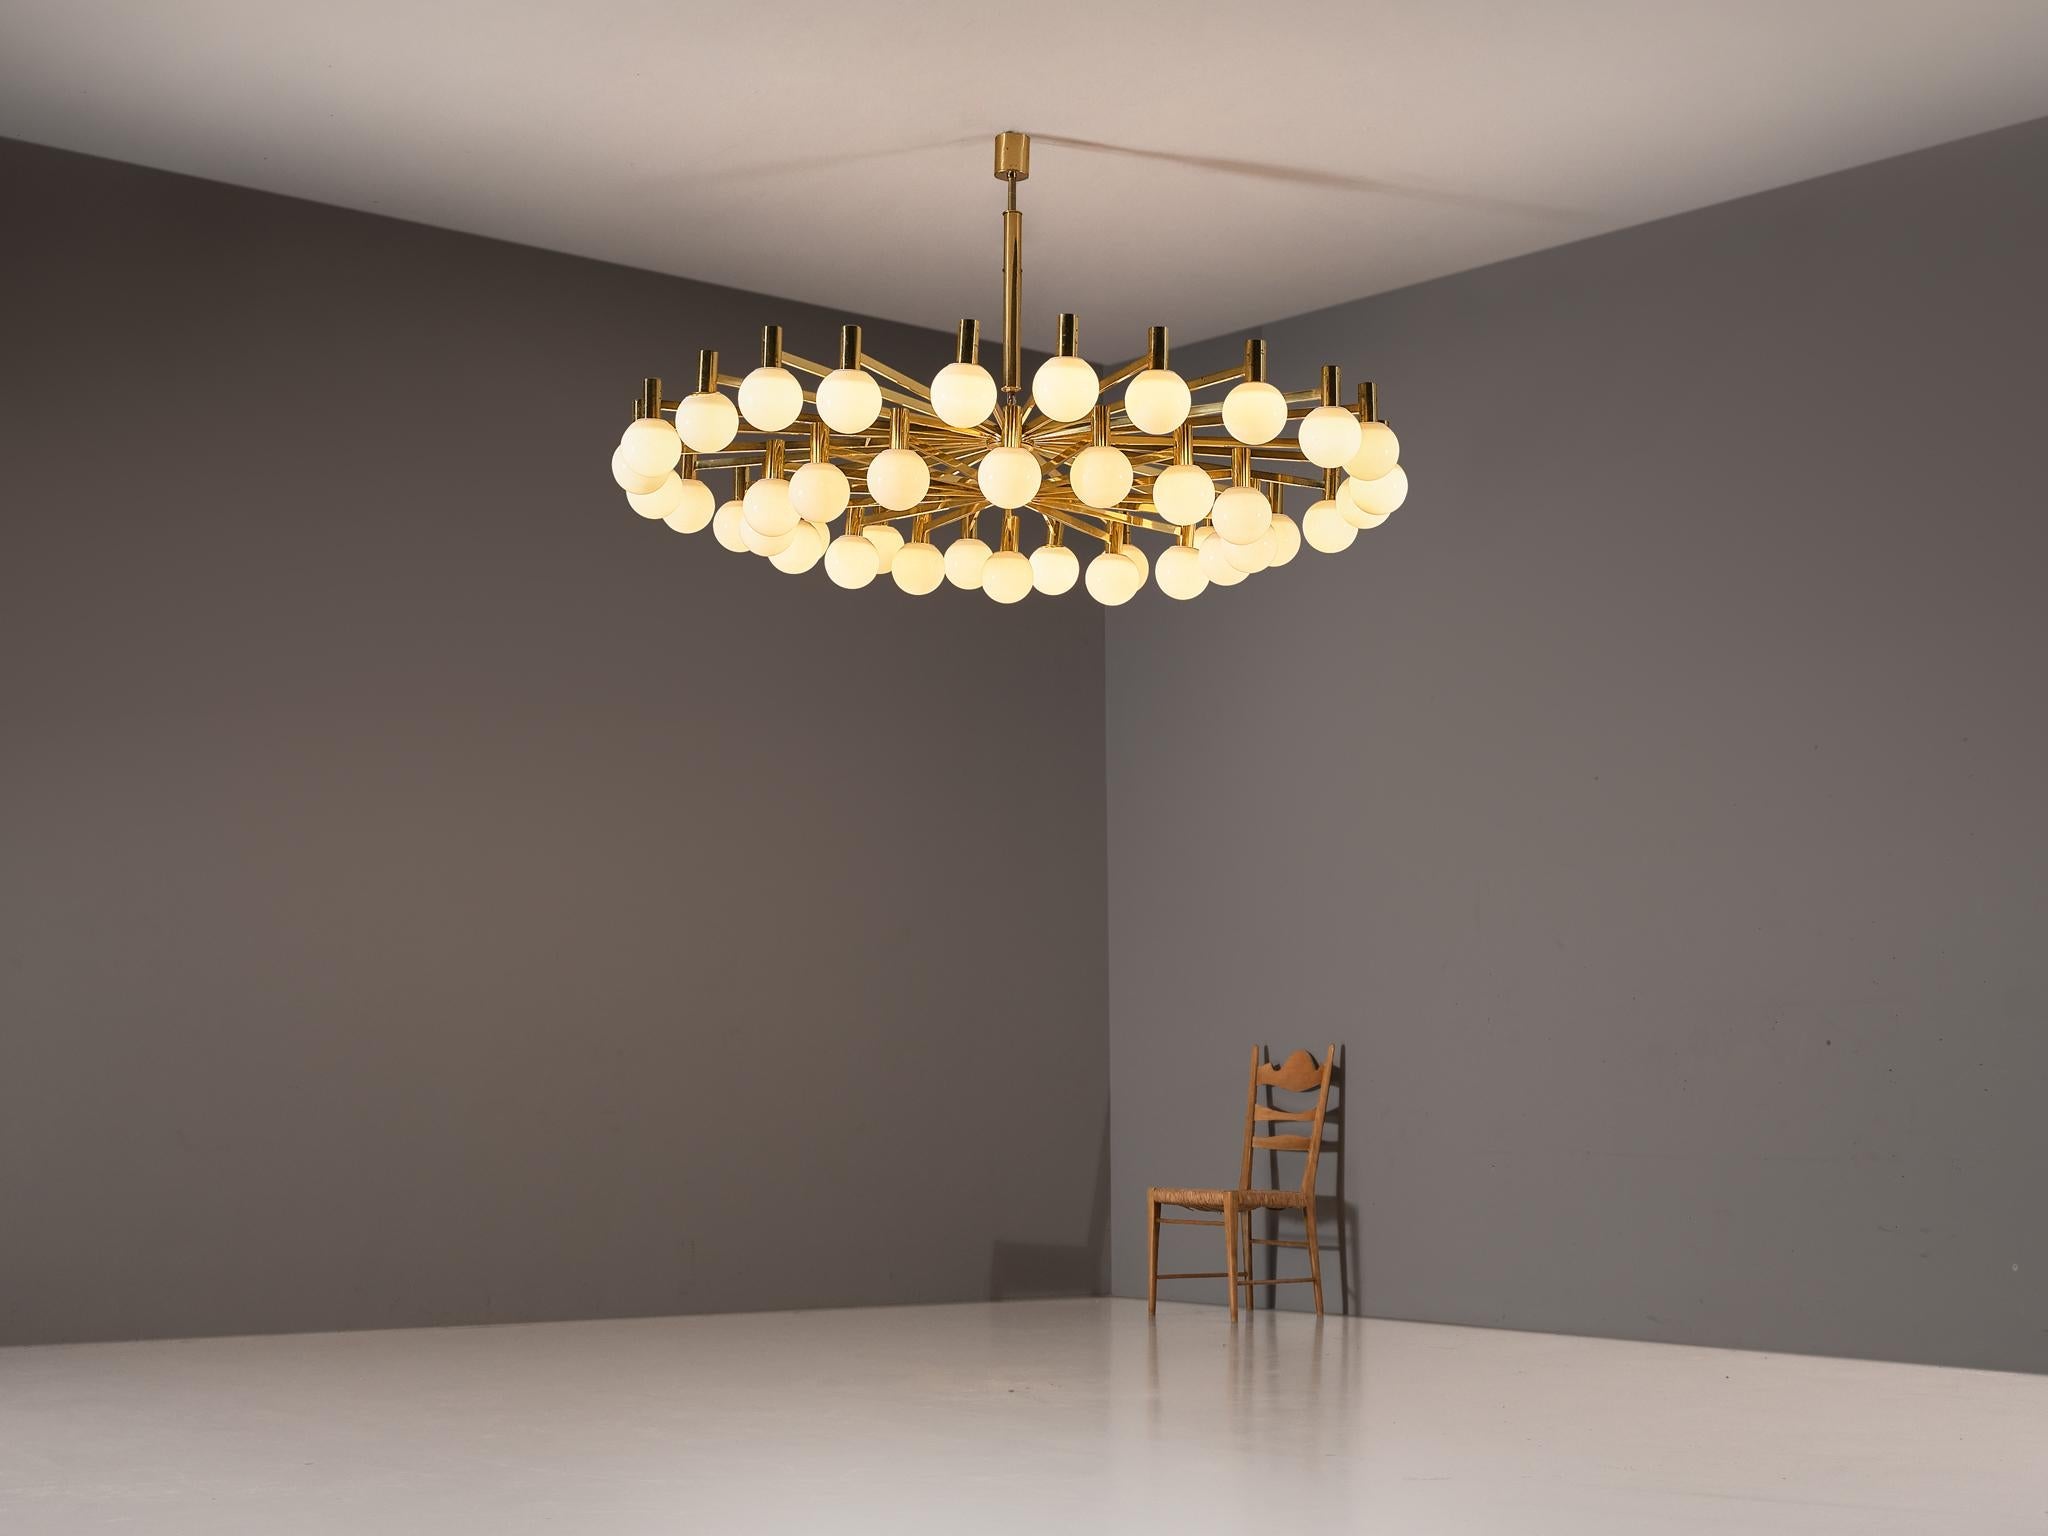 Grand Chandelier in Brass and Milk Glass Spheres 210 cm/82 in Wide